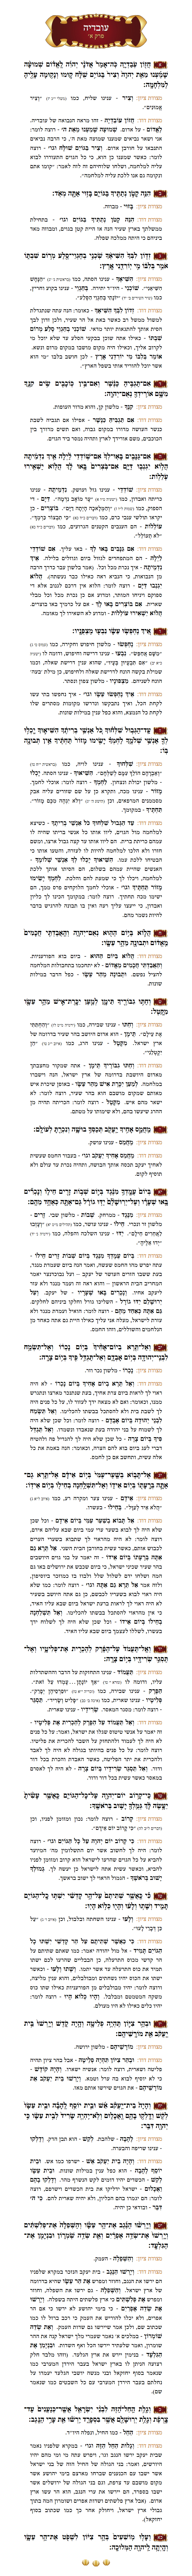 Sefer Ovadiah Chapter 1 with commentary